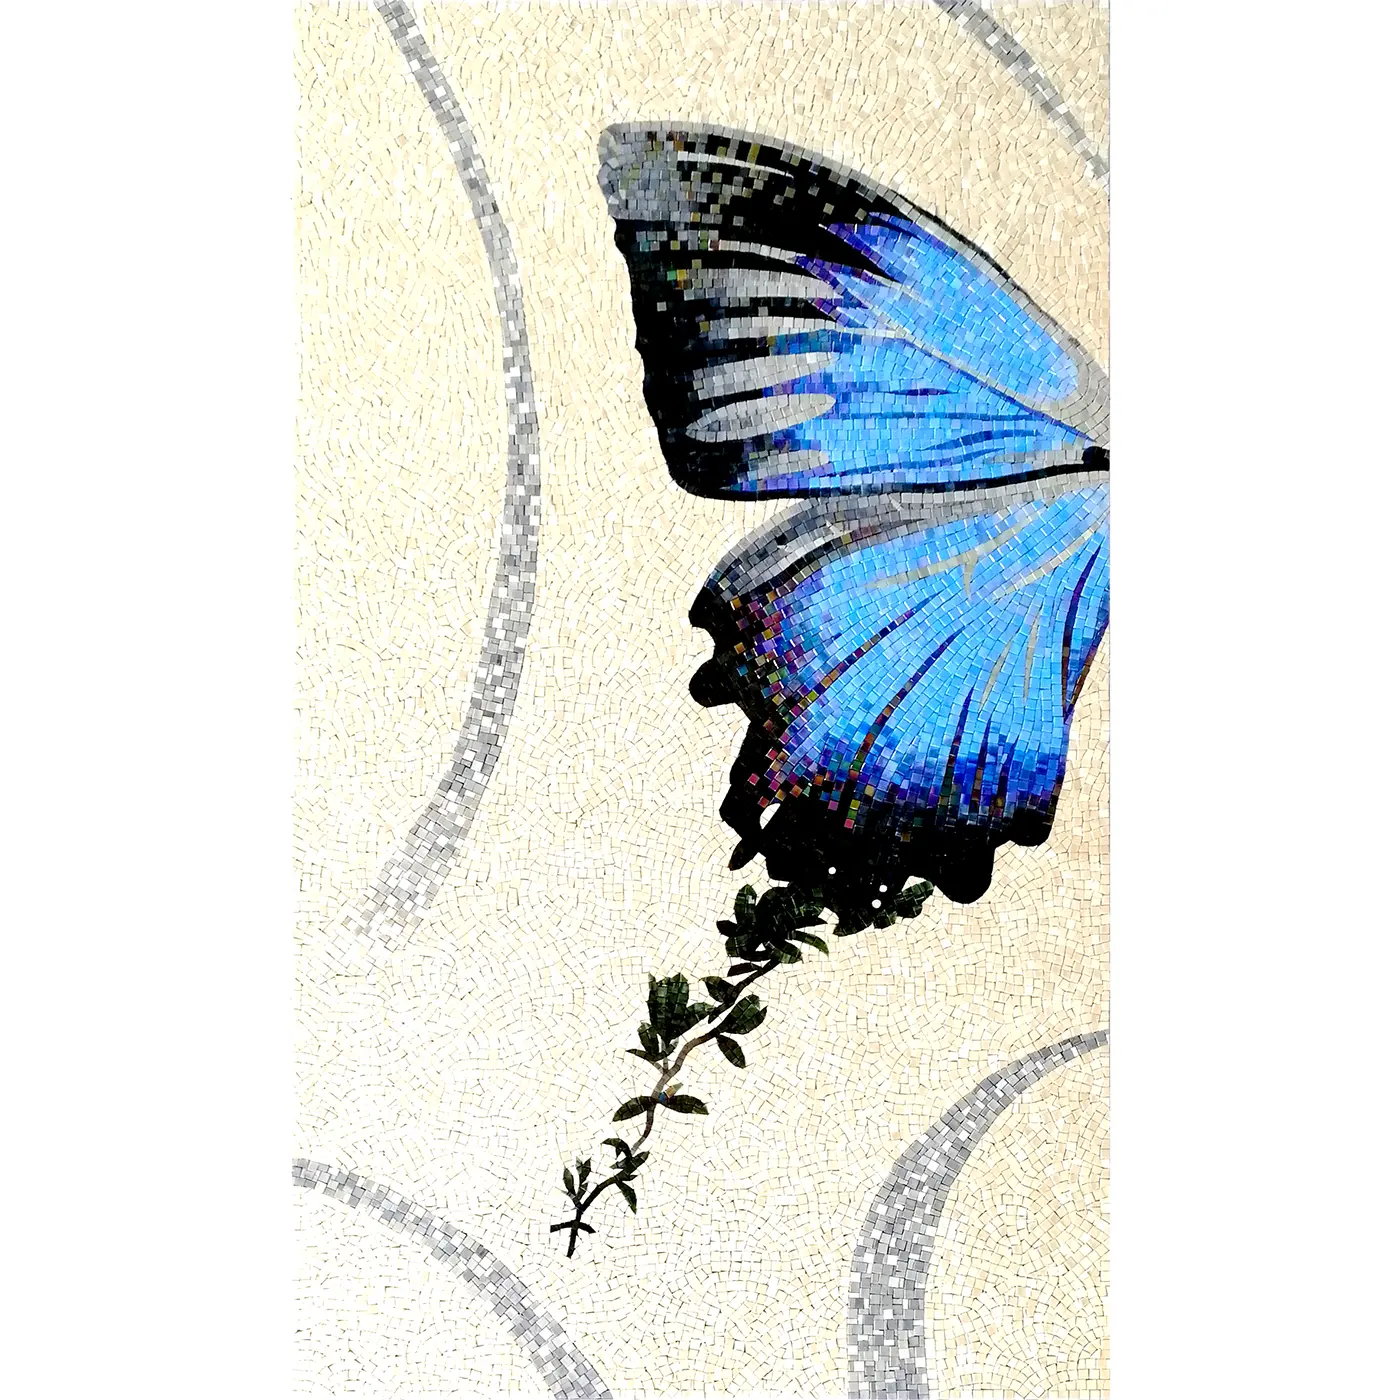 Customized Glass Mural Art Wall Mosaic Living Room Bedroom Butterfly Picture Mosaic Art Tile